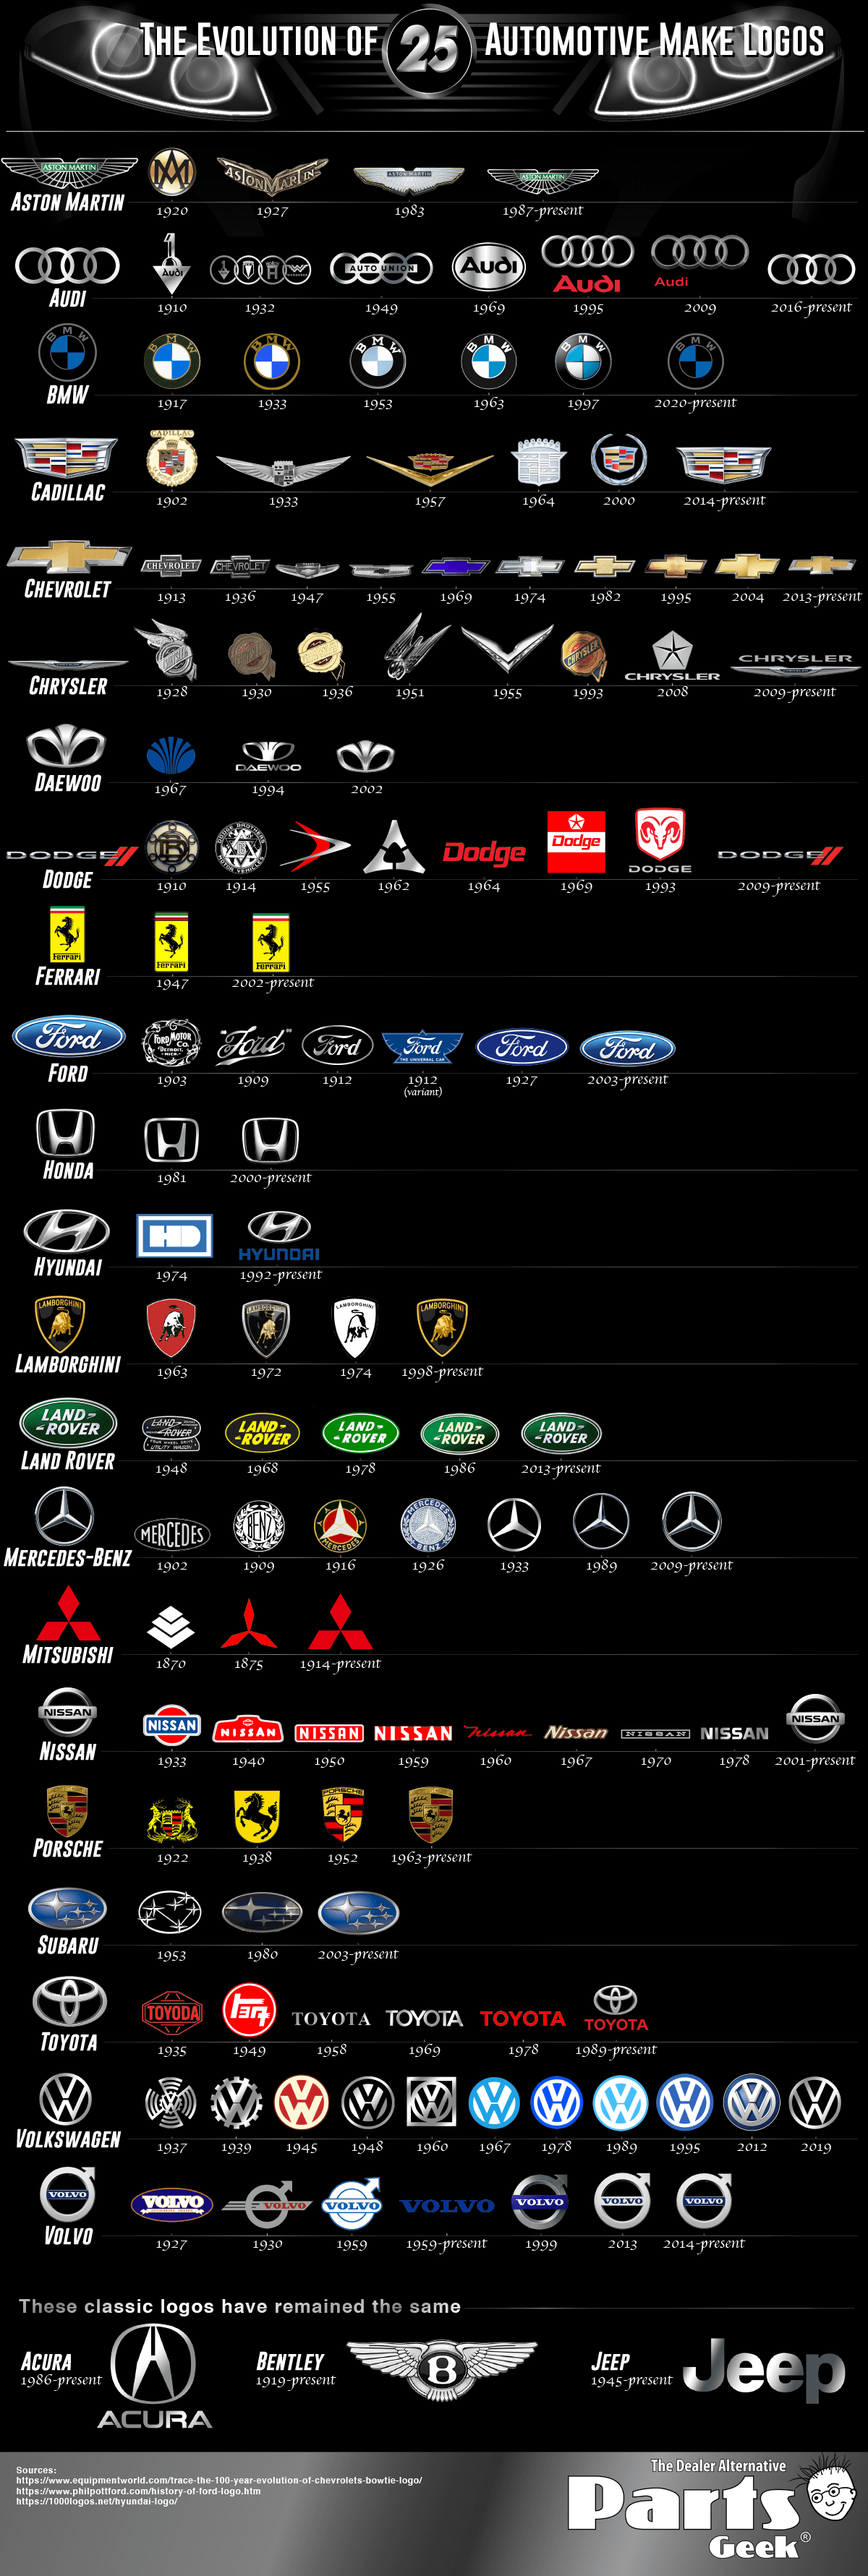 The Evolution of Car Brand Logos Over Time